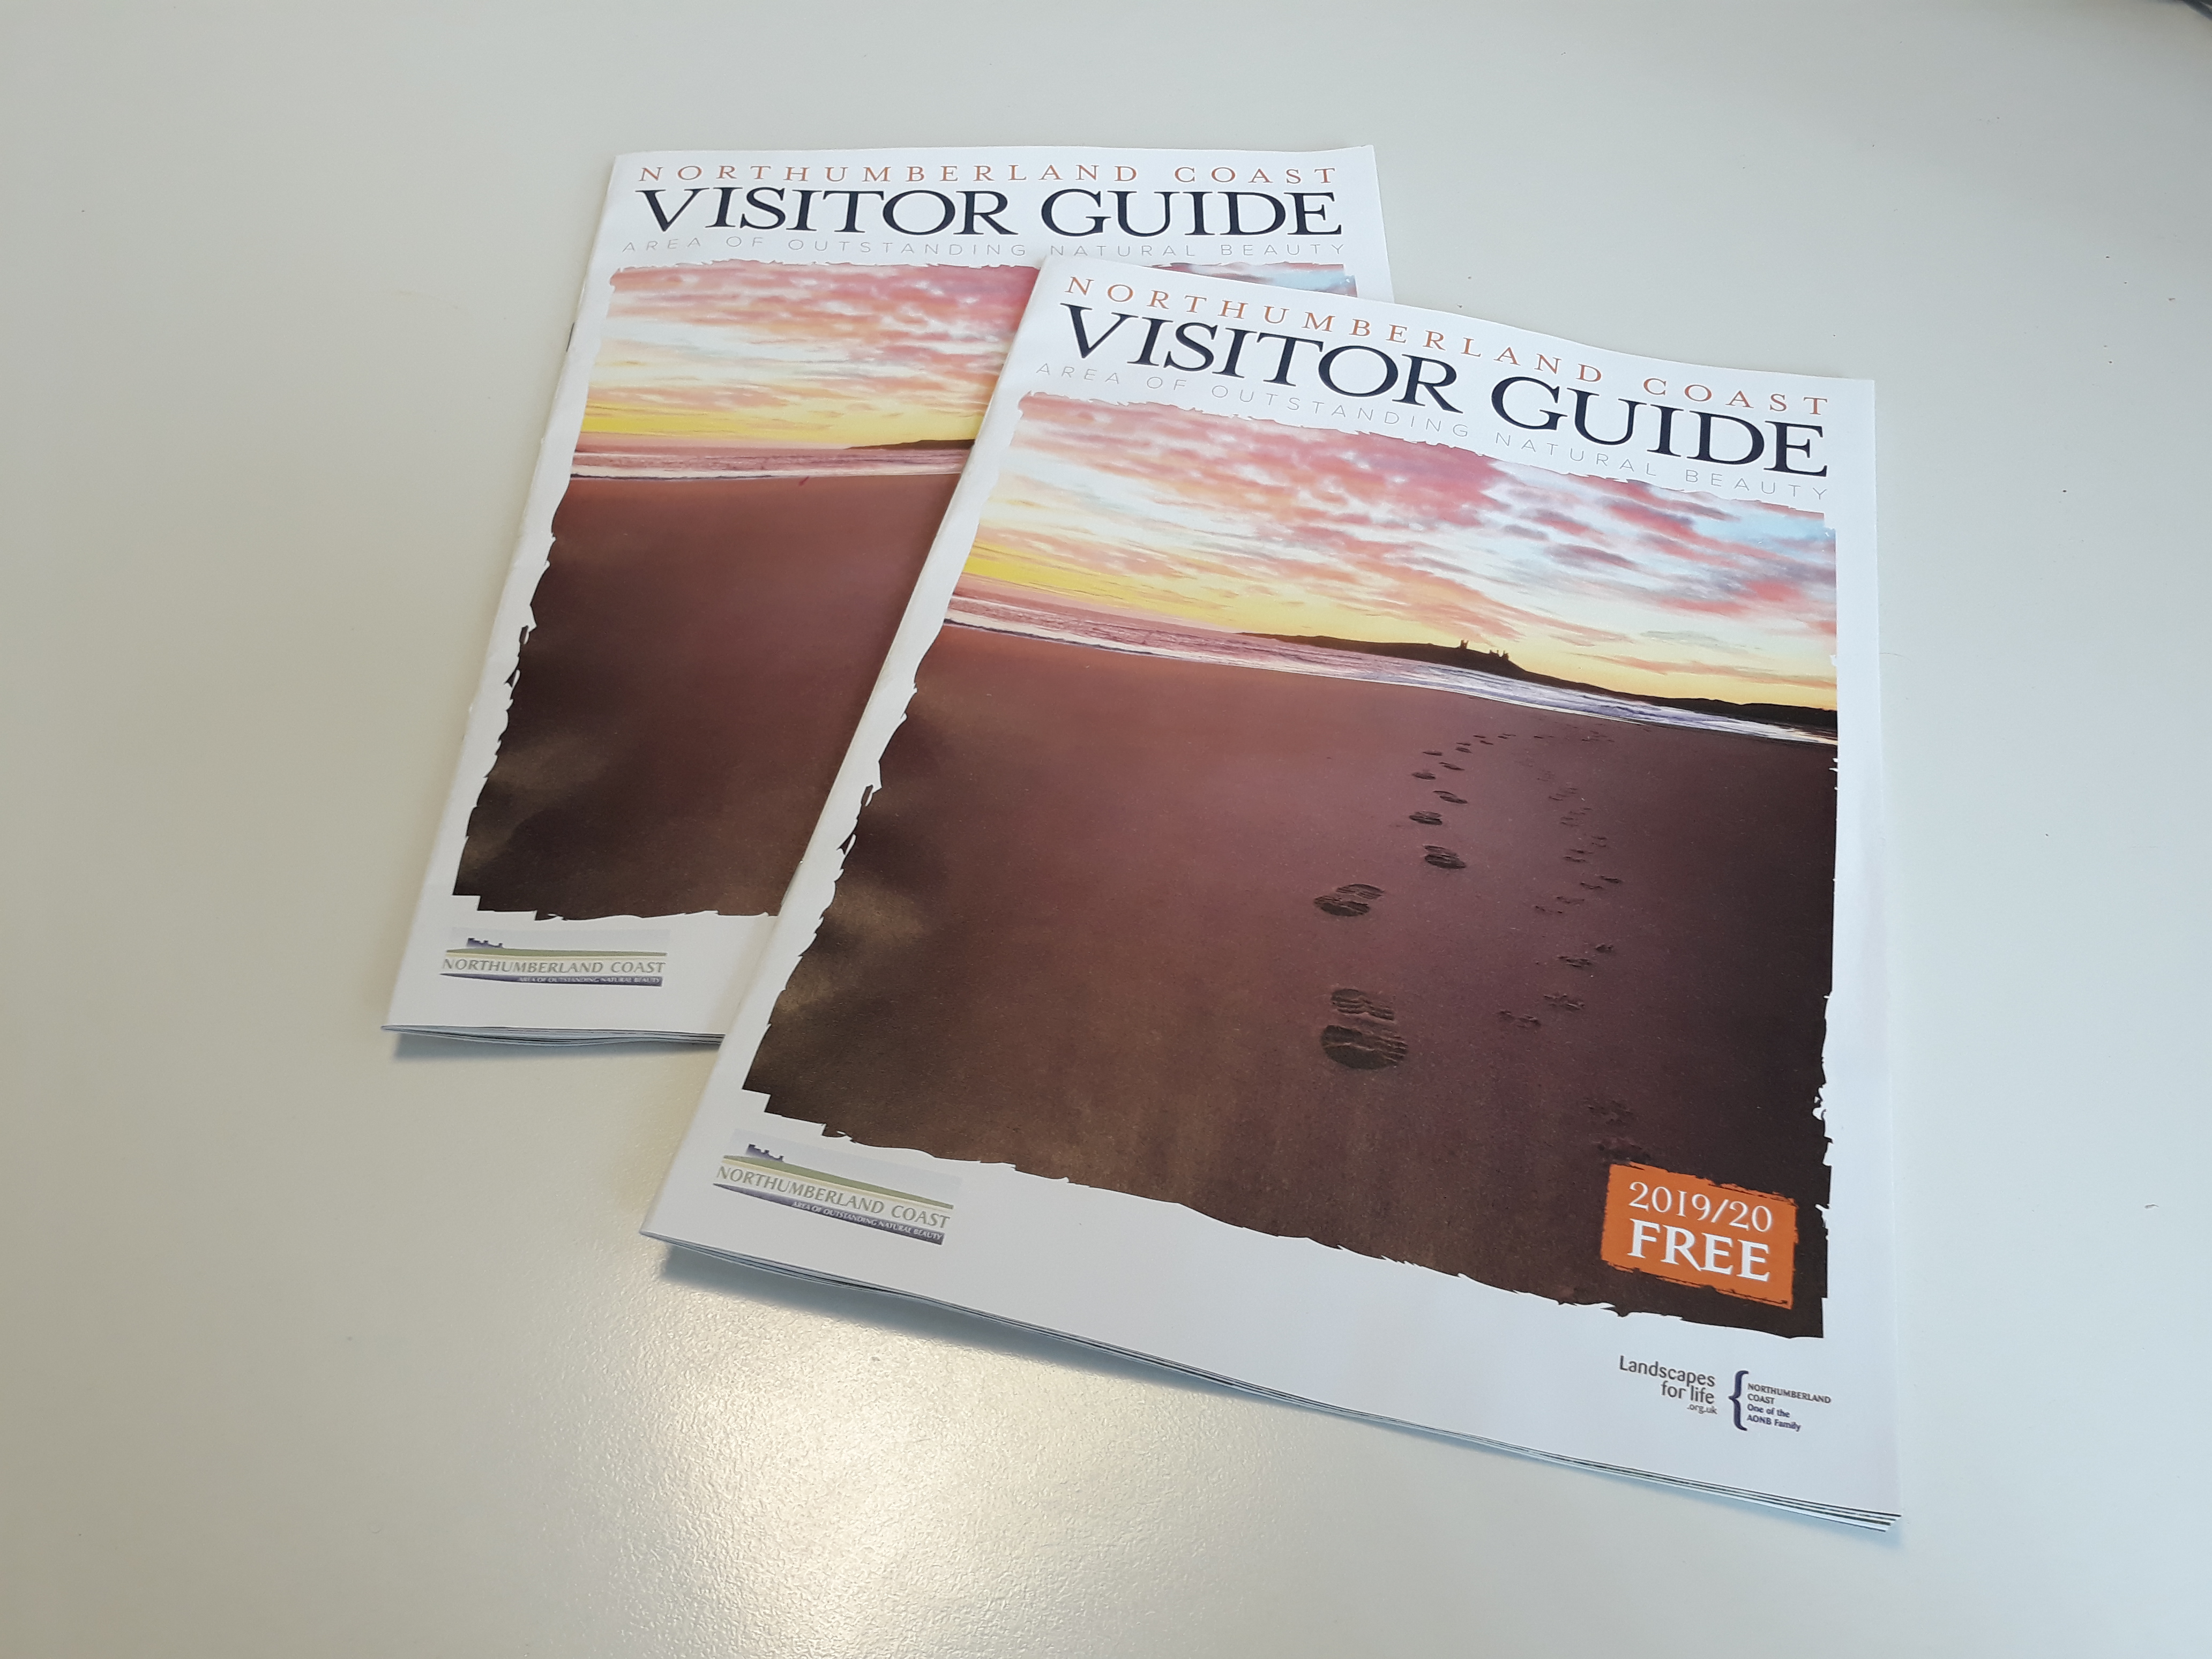 Walk away with the AONB Visitor Guide from North Tourism Fair